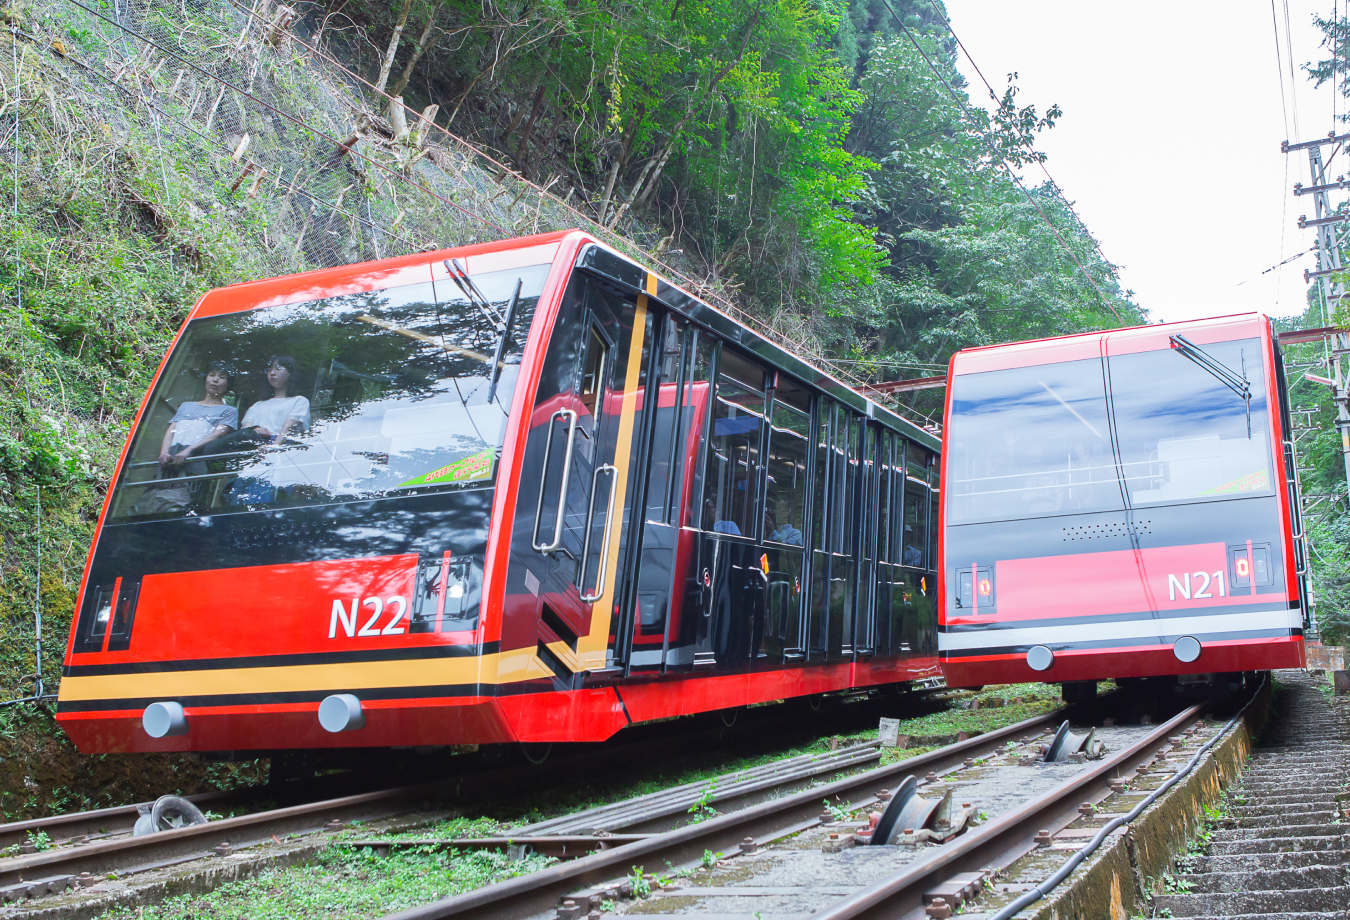 Funicular technology, which is useful on slopes and in cities